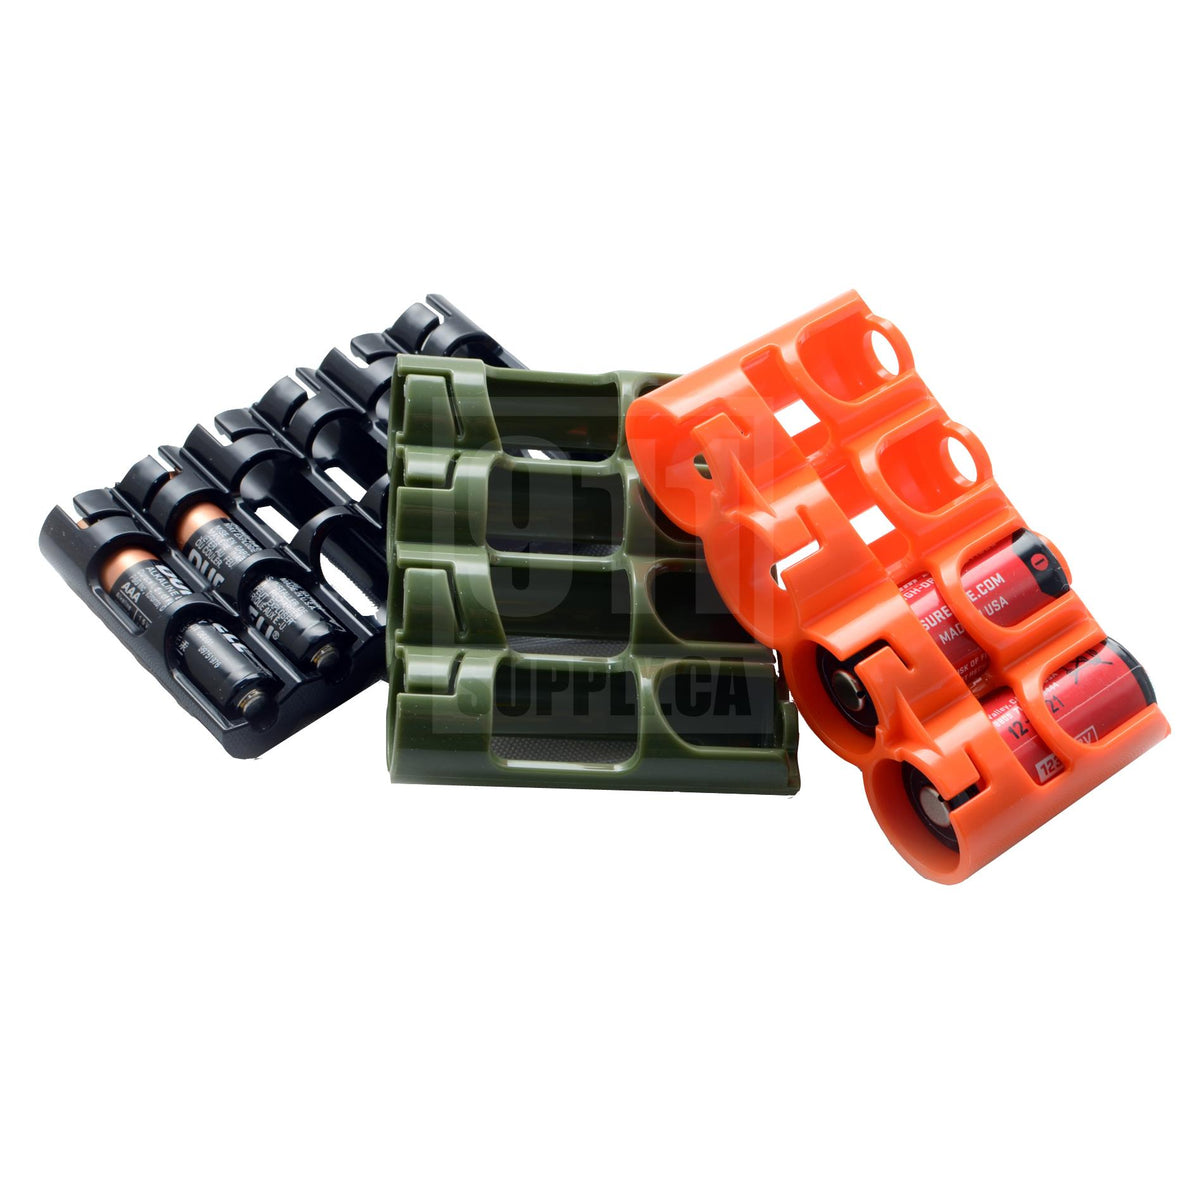 Storacell AAA 6-Cell Battery Holder | 911supply.ca